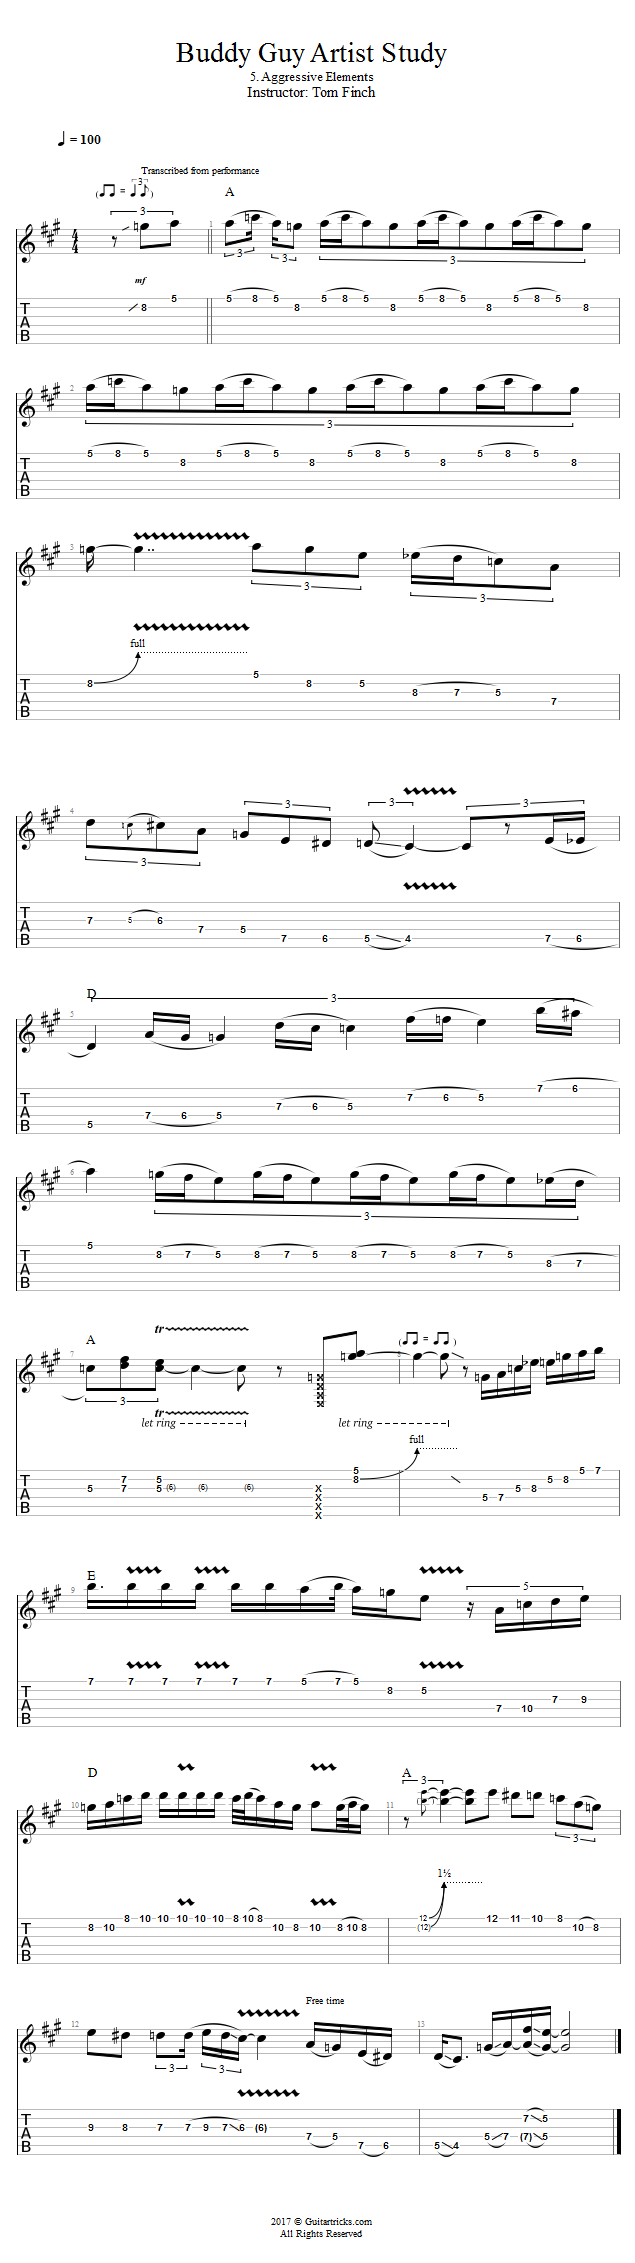 Aggressive Elements song notation